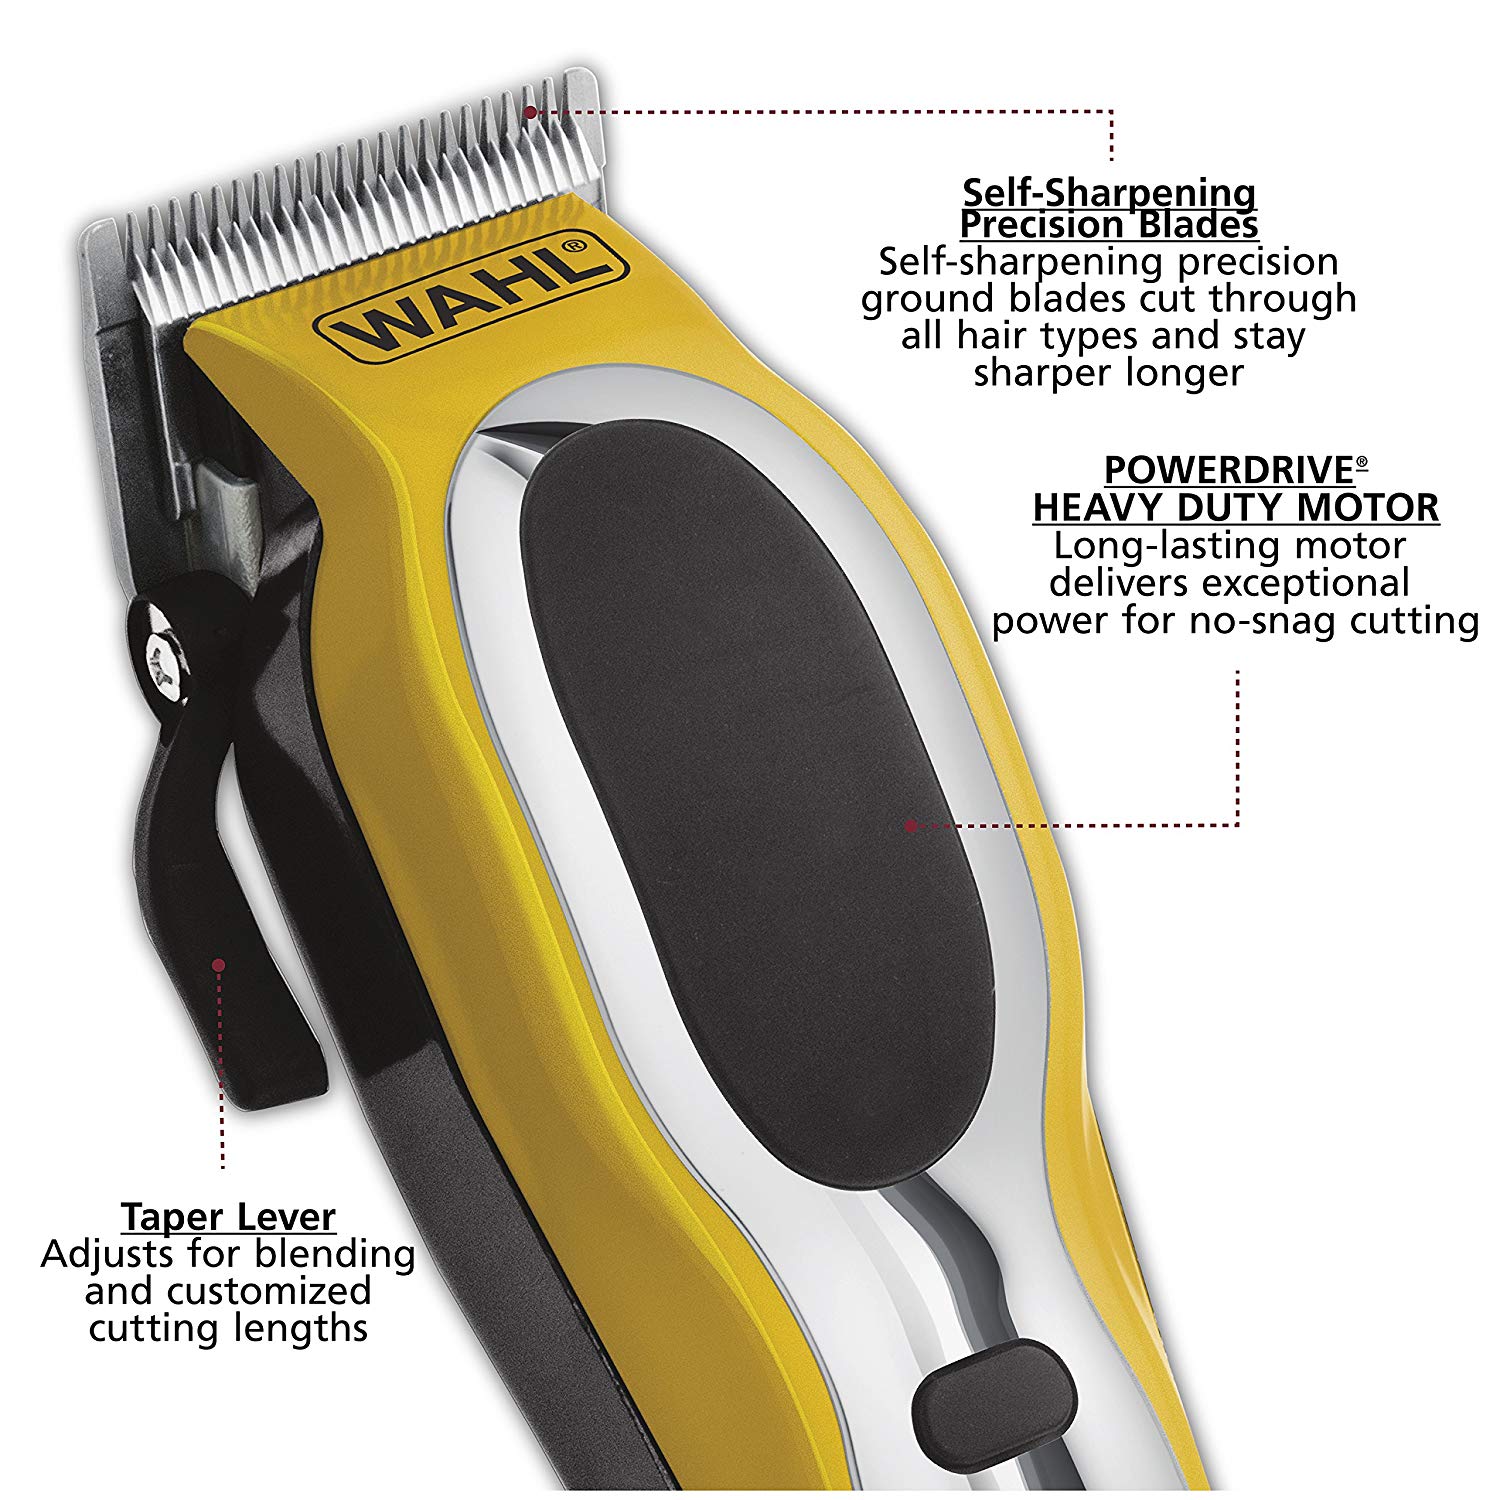 wahl all pro adjustable clippers